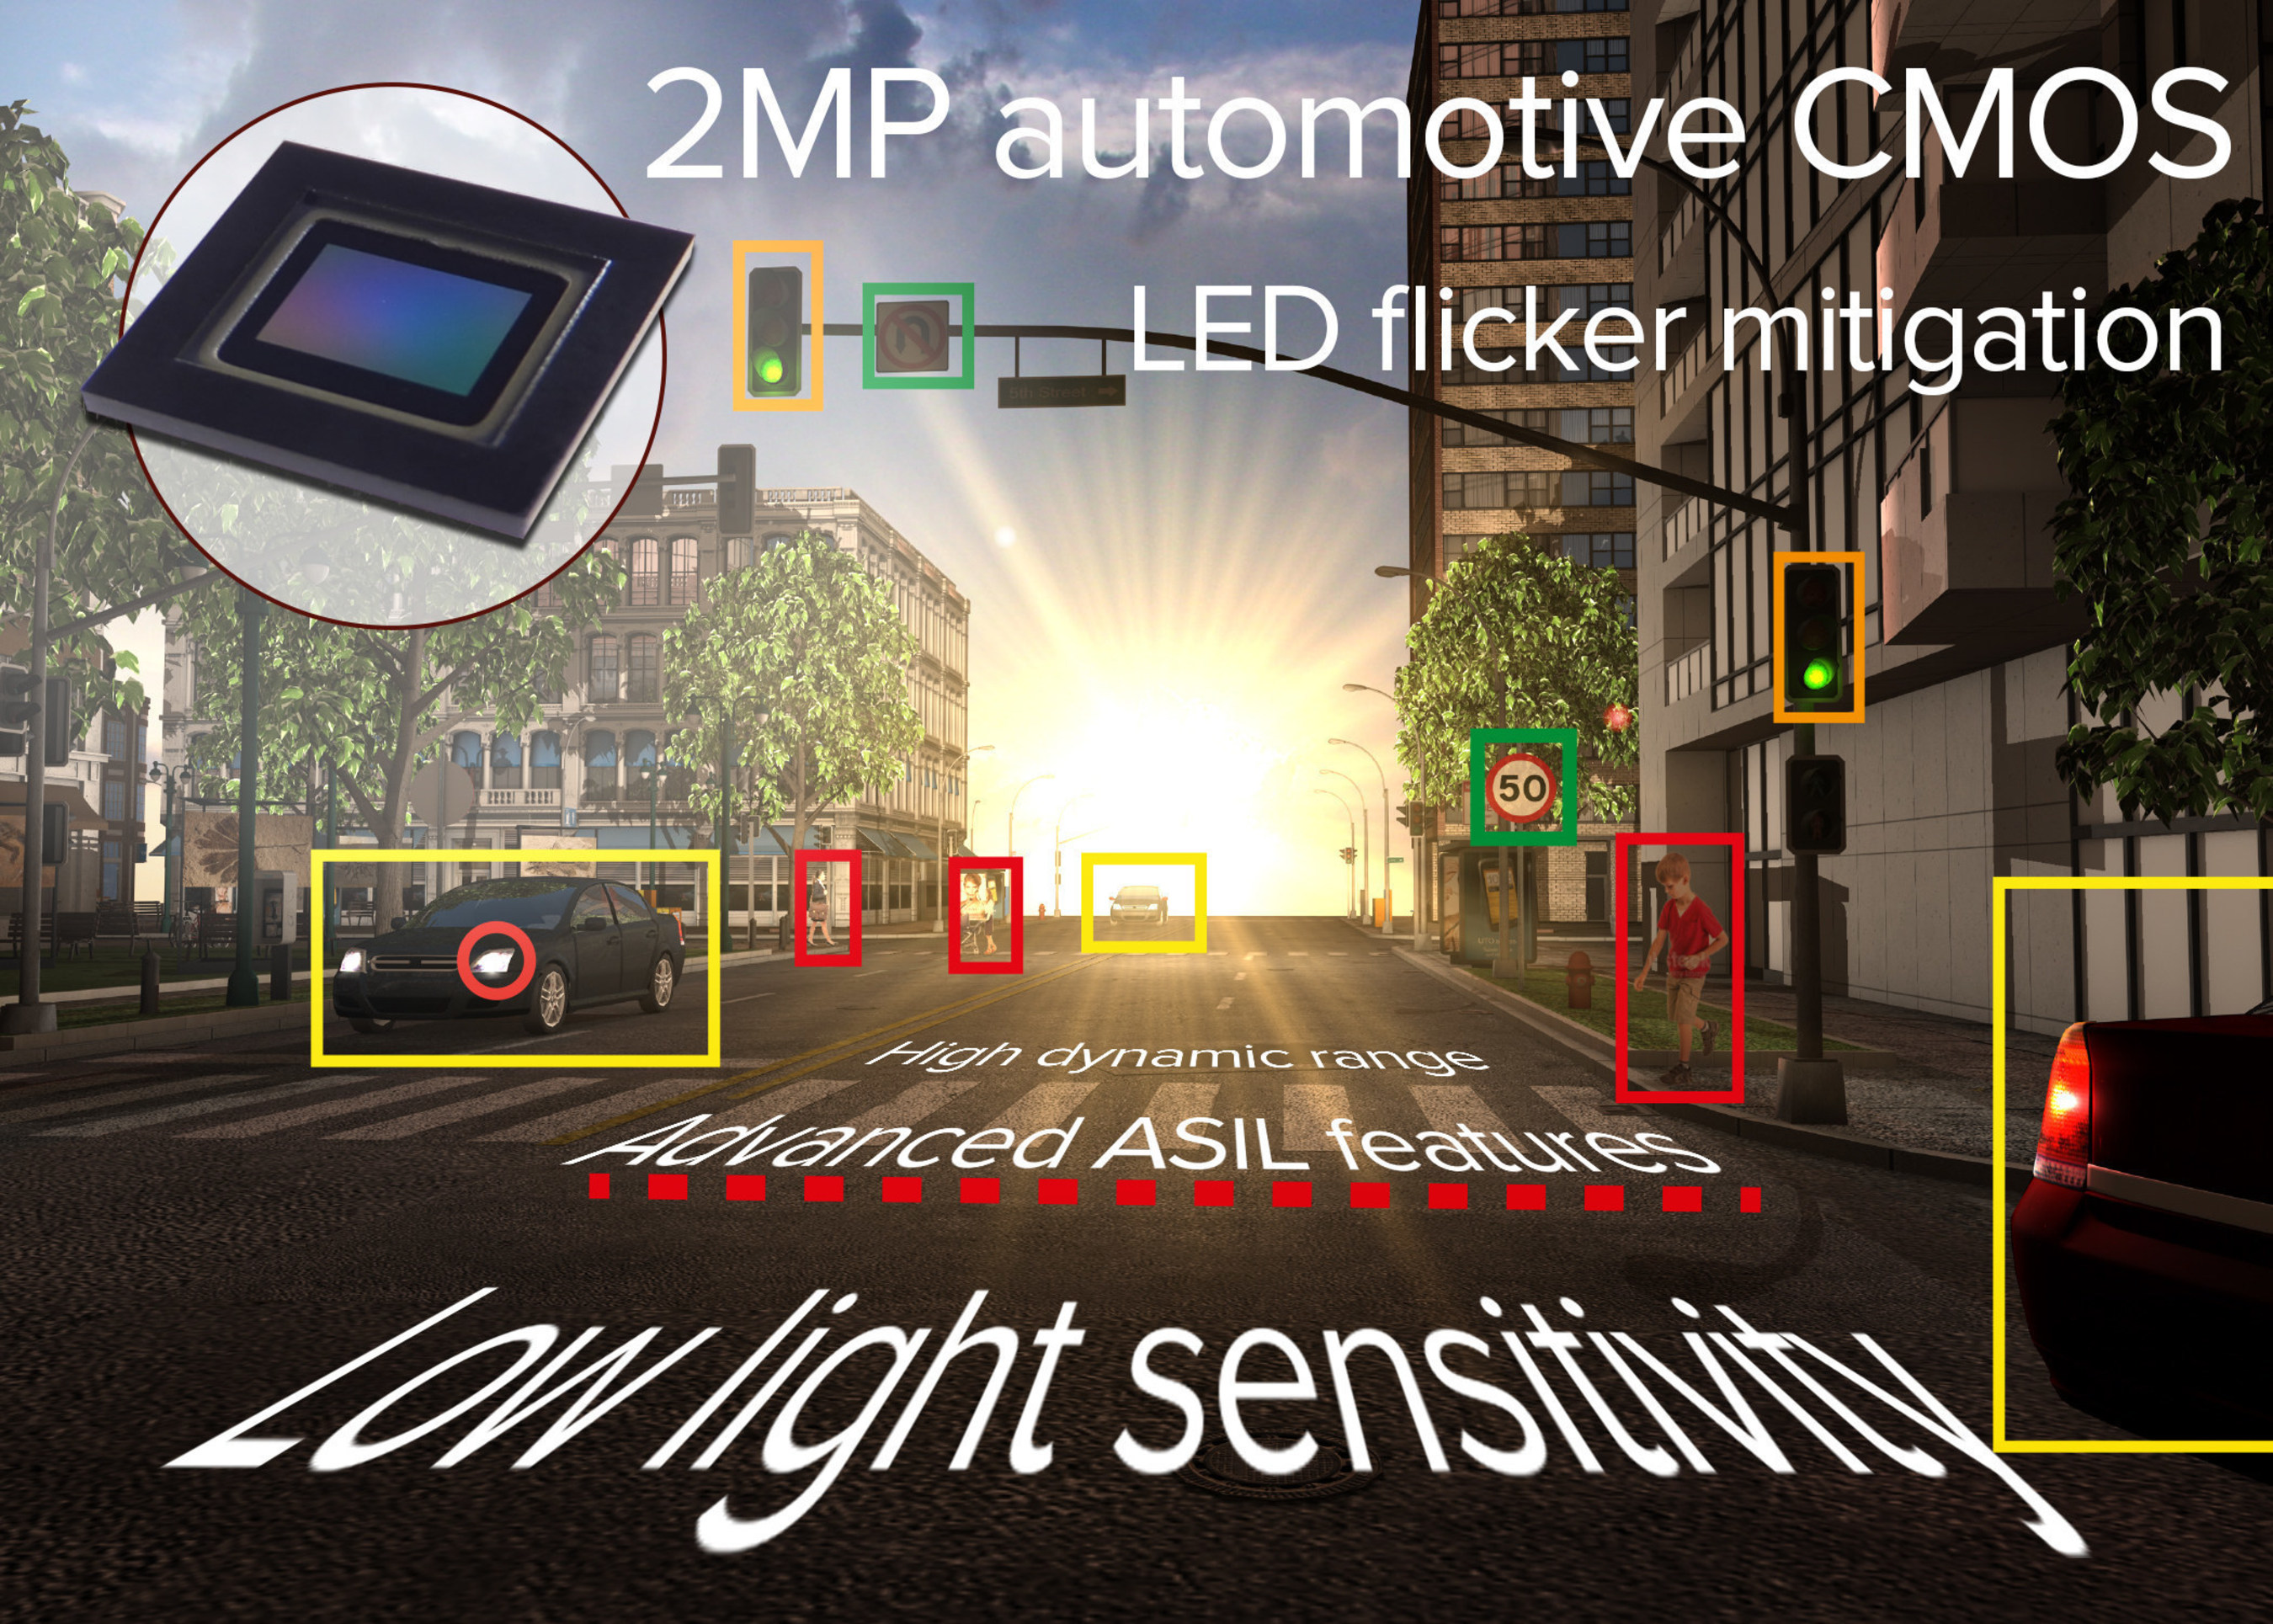 Toshiba's CSA02M00PB is the first 2MP automotive CMOS image sensor with LED flicker mitigation.